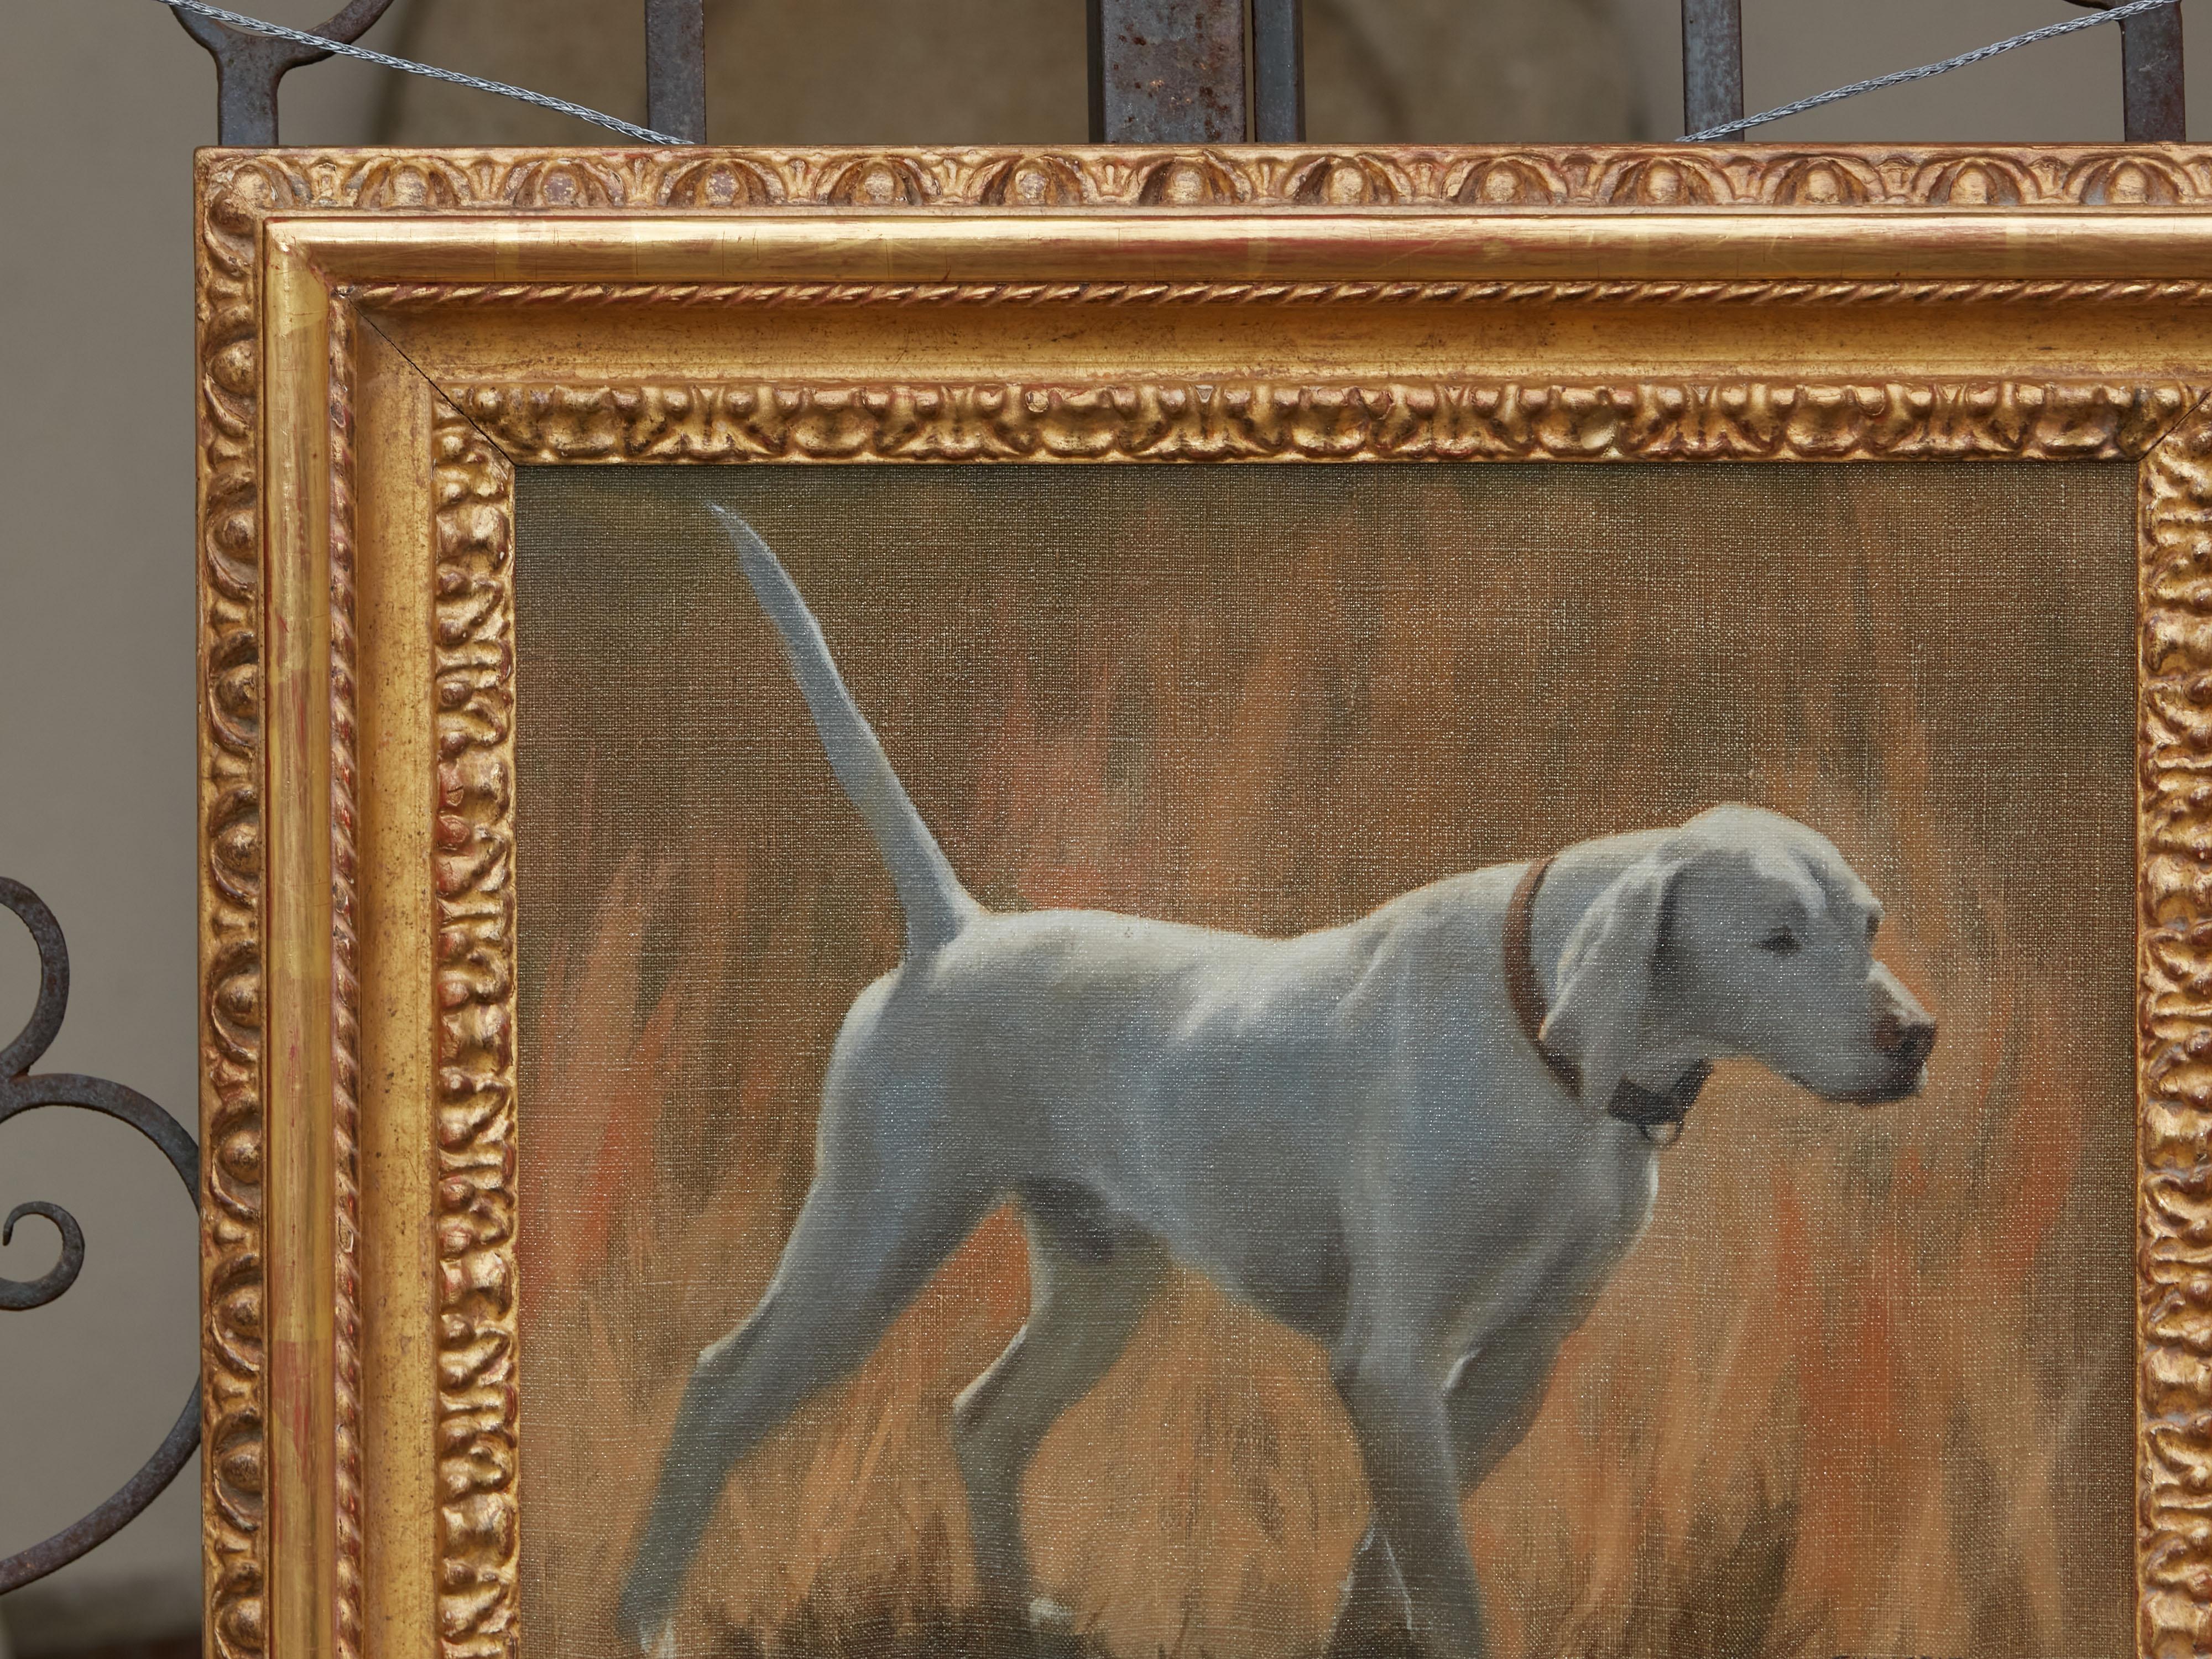 20th Century Oil on Canvas Painting of a Sporting Dog in Giltwood Frame, Signed Christie